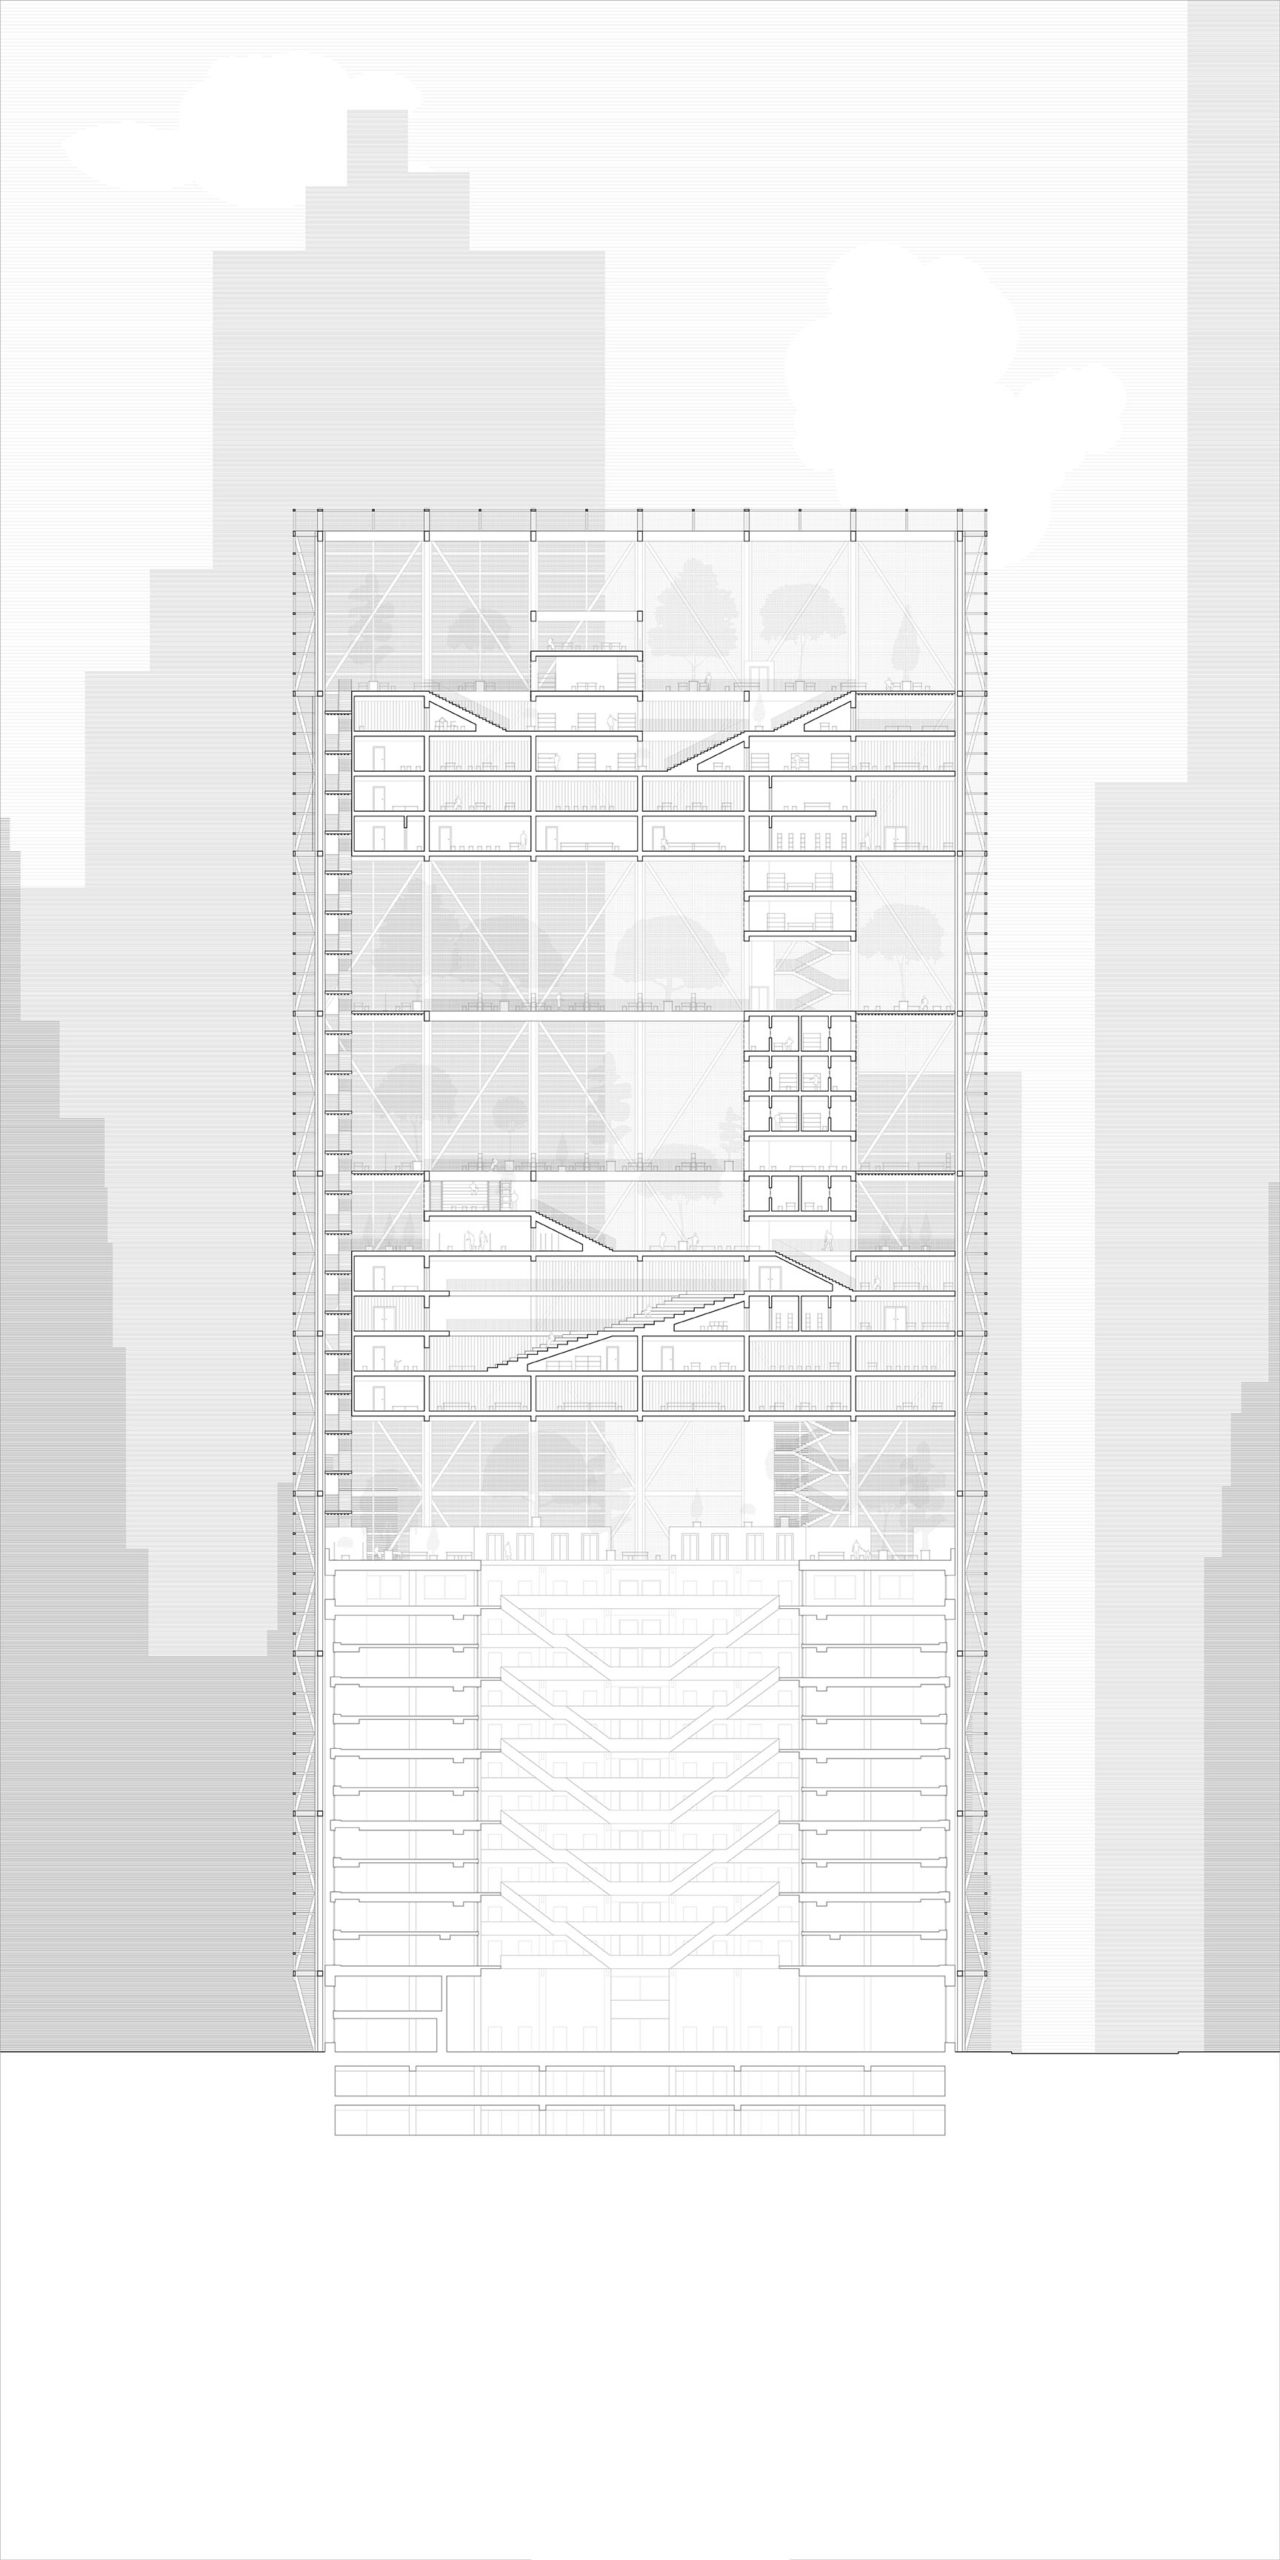 Sectional drawing of building